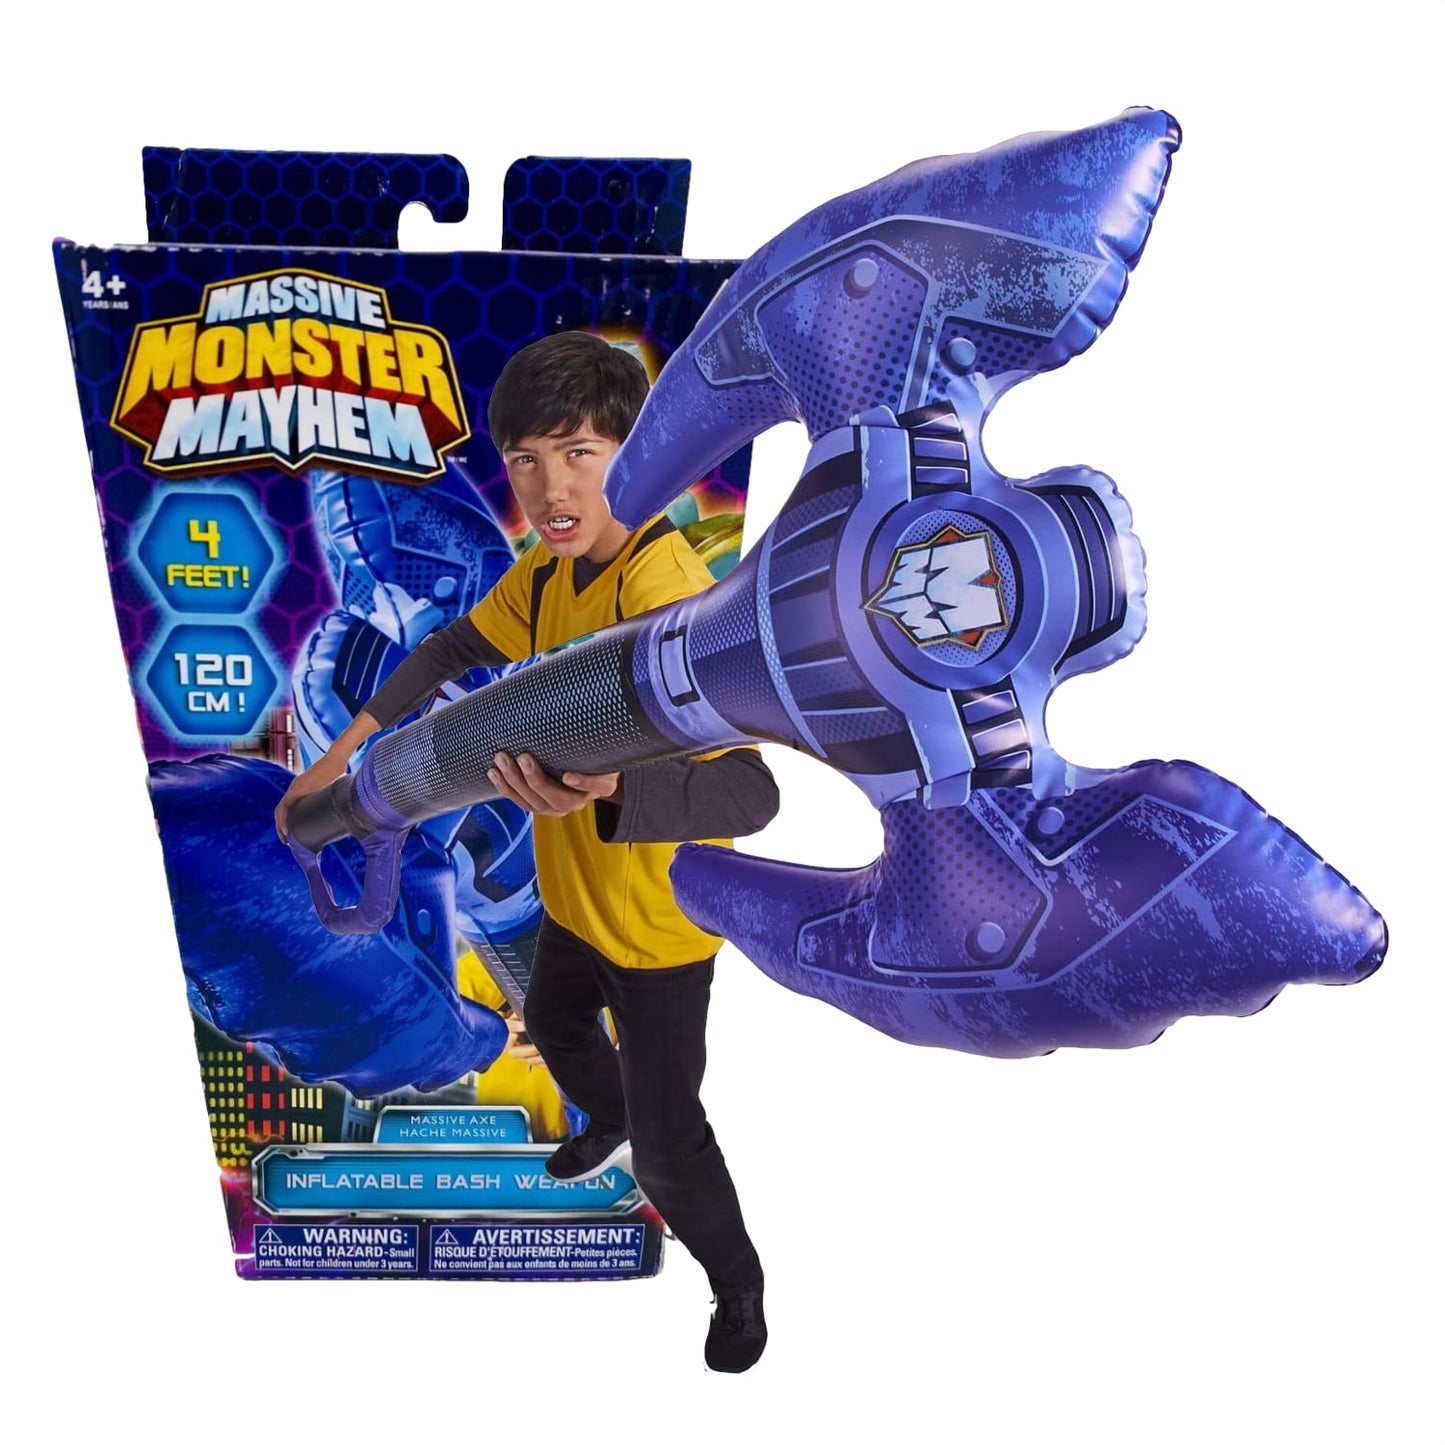 Massive Monster Mayhem - Inflatable Bash Weapons - Choice Of 3